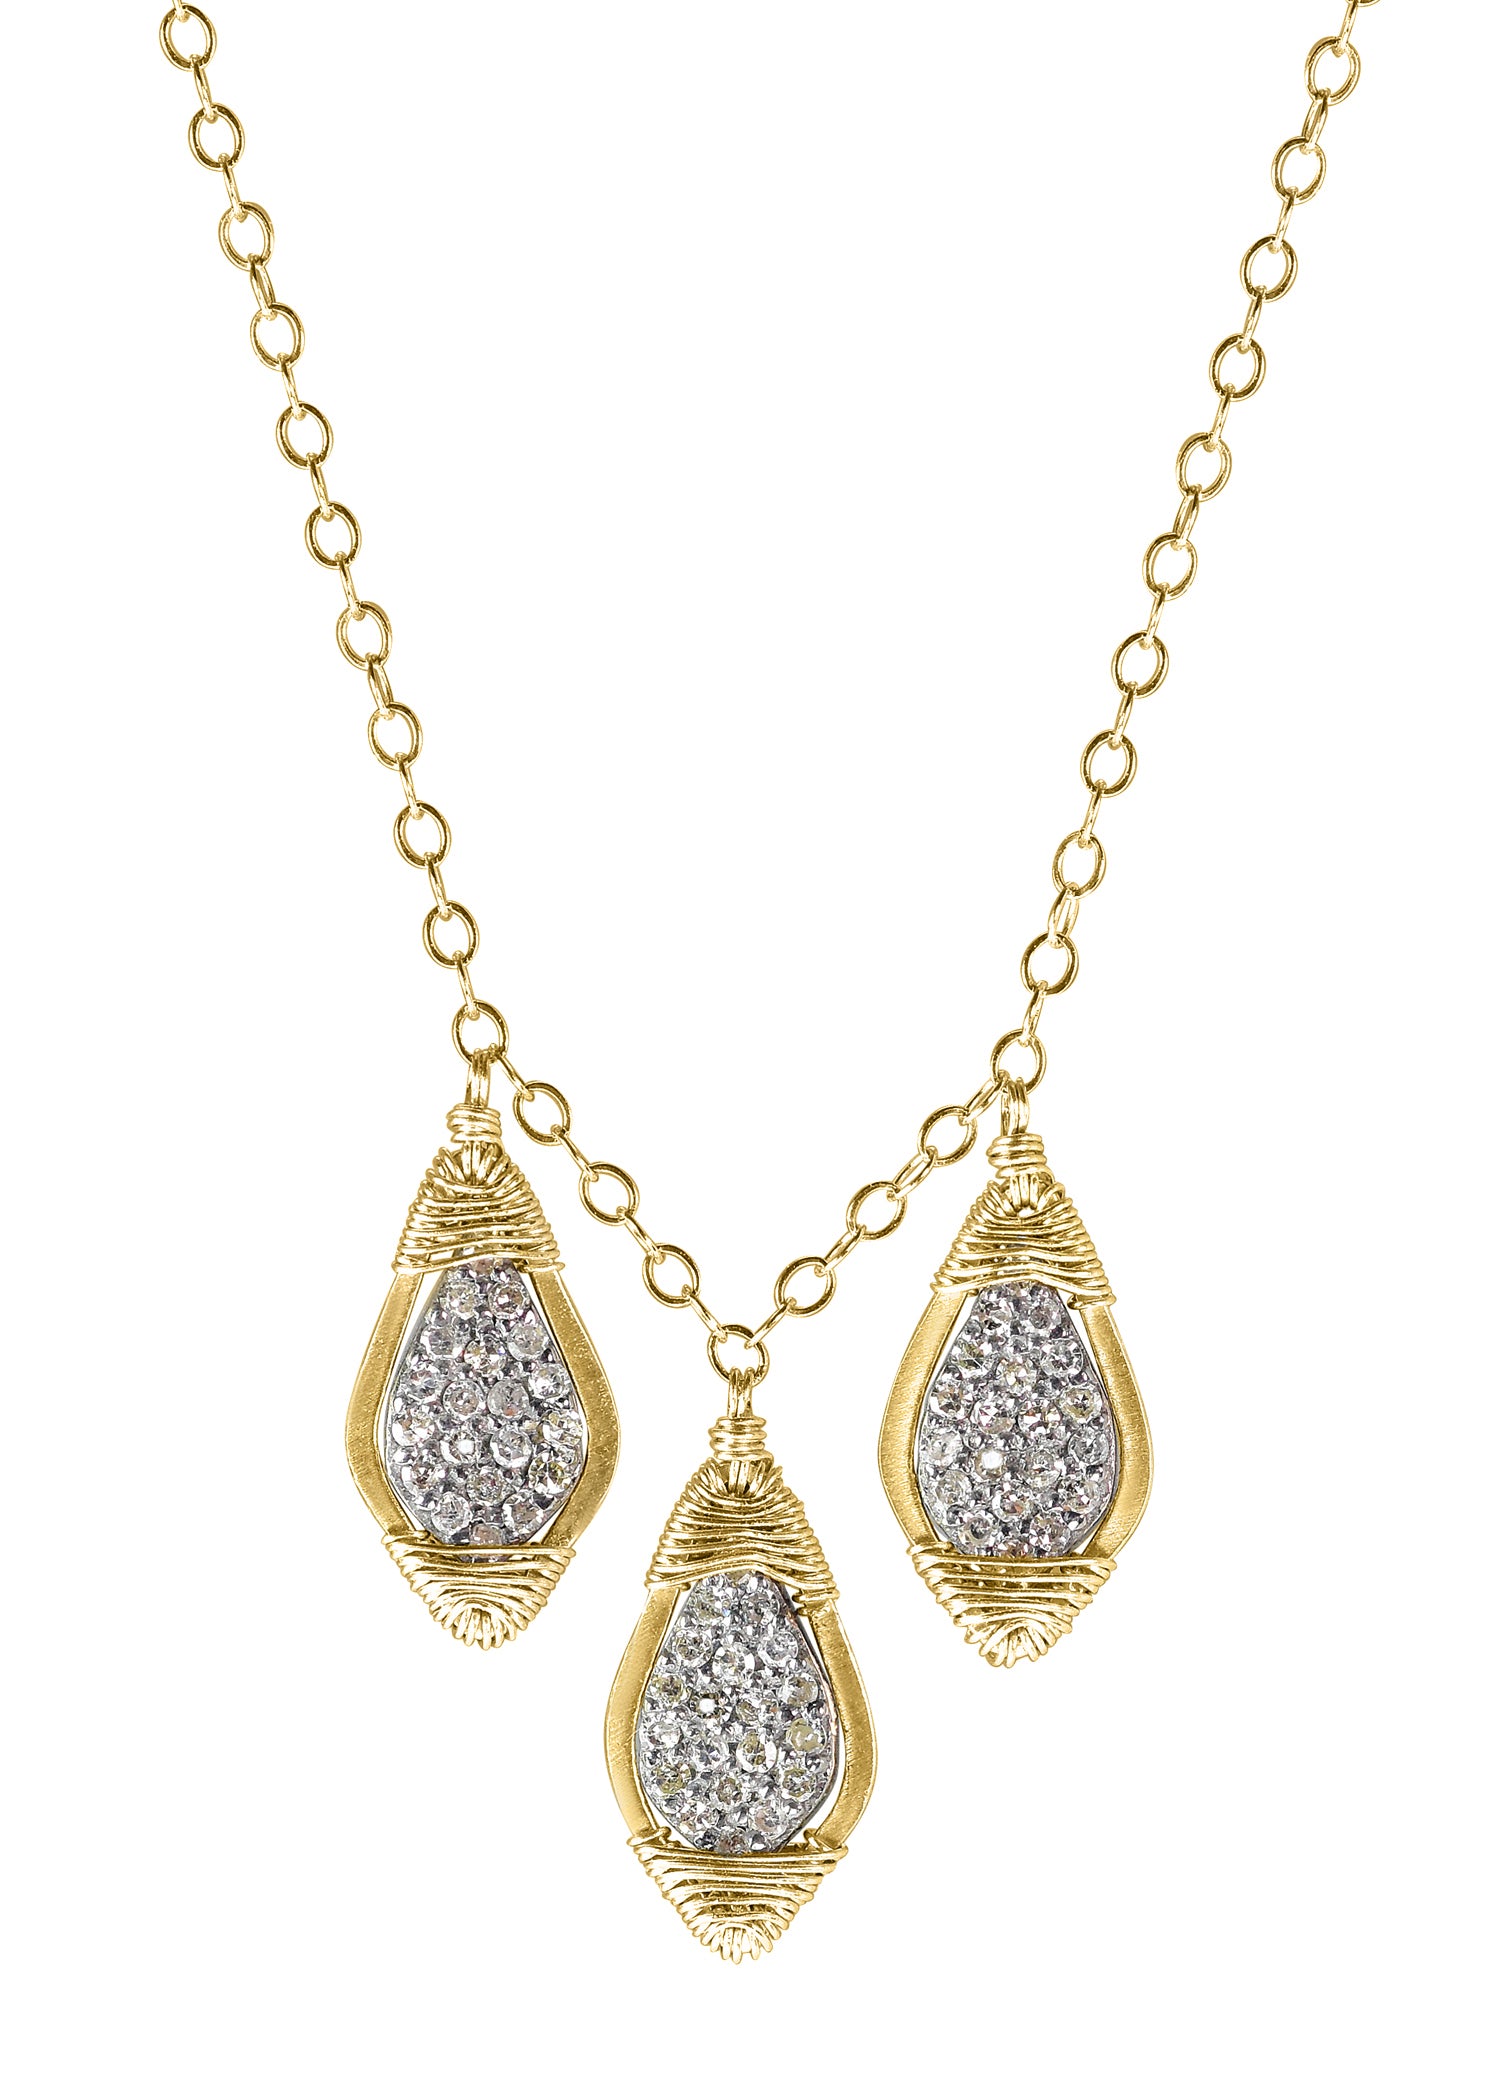 Diamond 14k gold Sterling silver Mixed metal Special order Necklace measures 17-1/4" in length Pendants measure 9/16" in length and 5/16" in width at the widest point (x3) Handmade in our Los Angeles studio